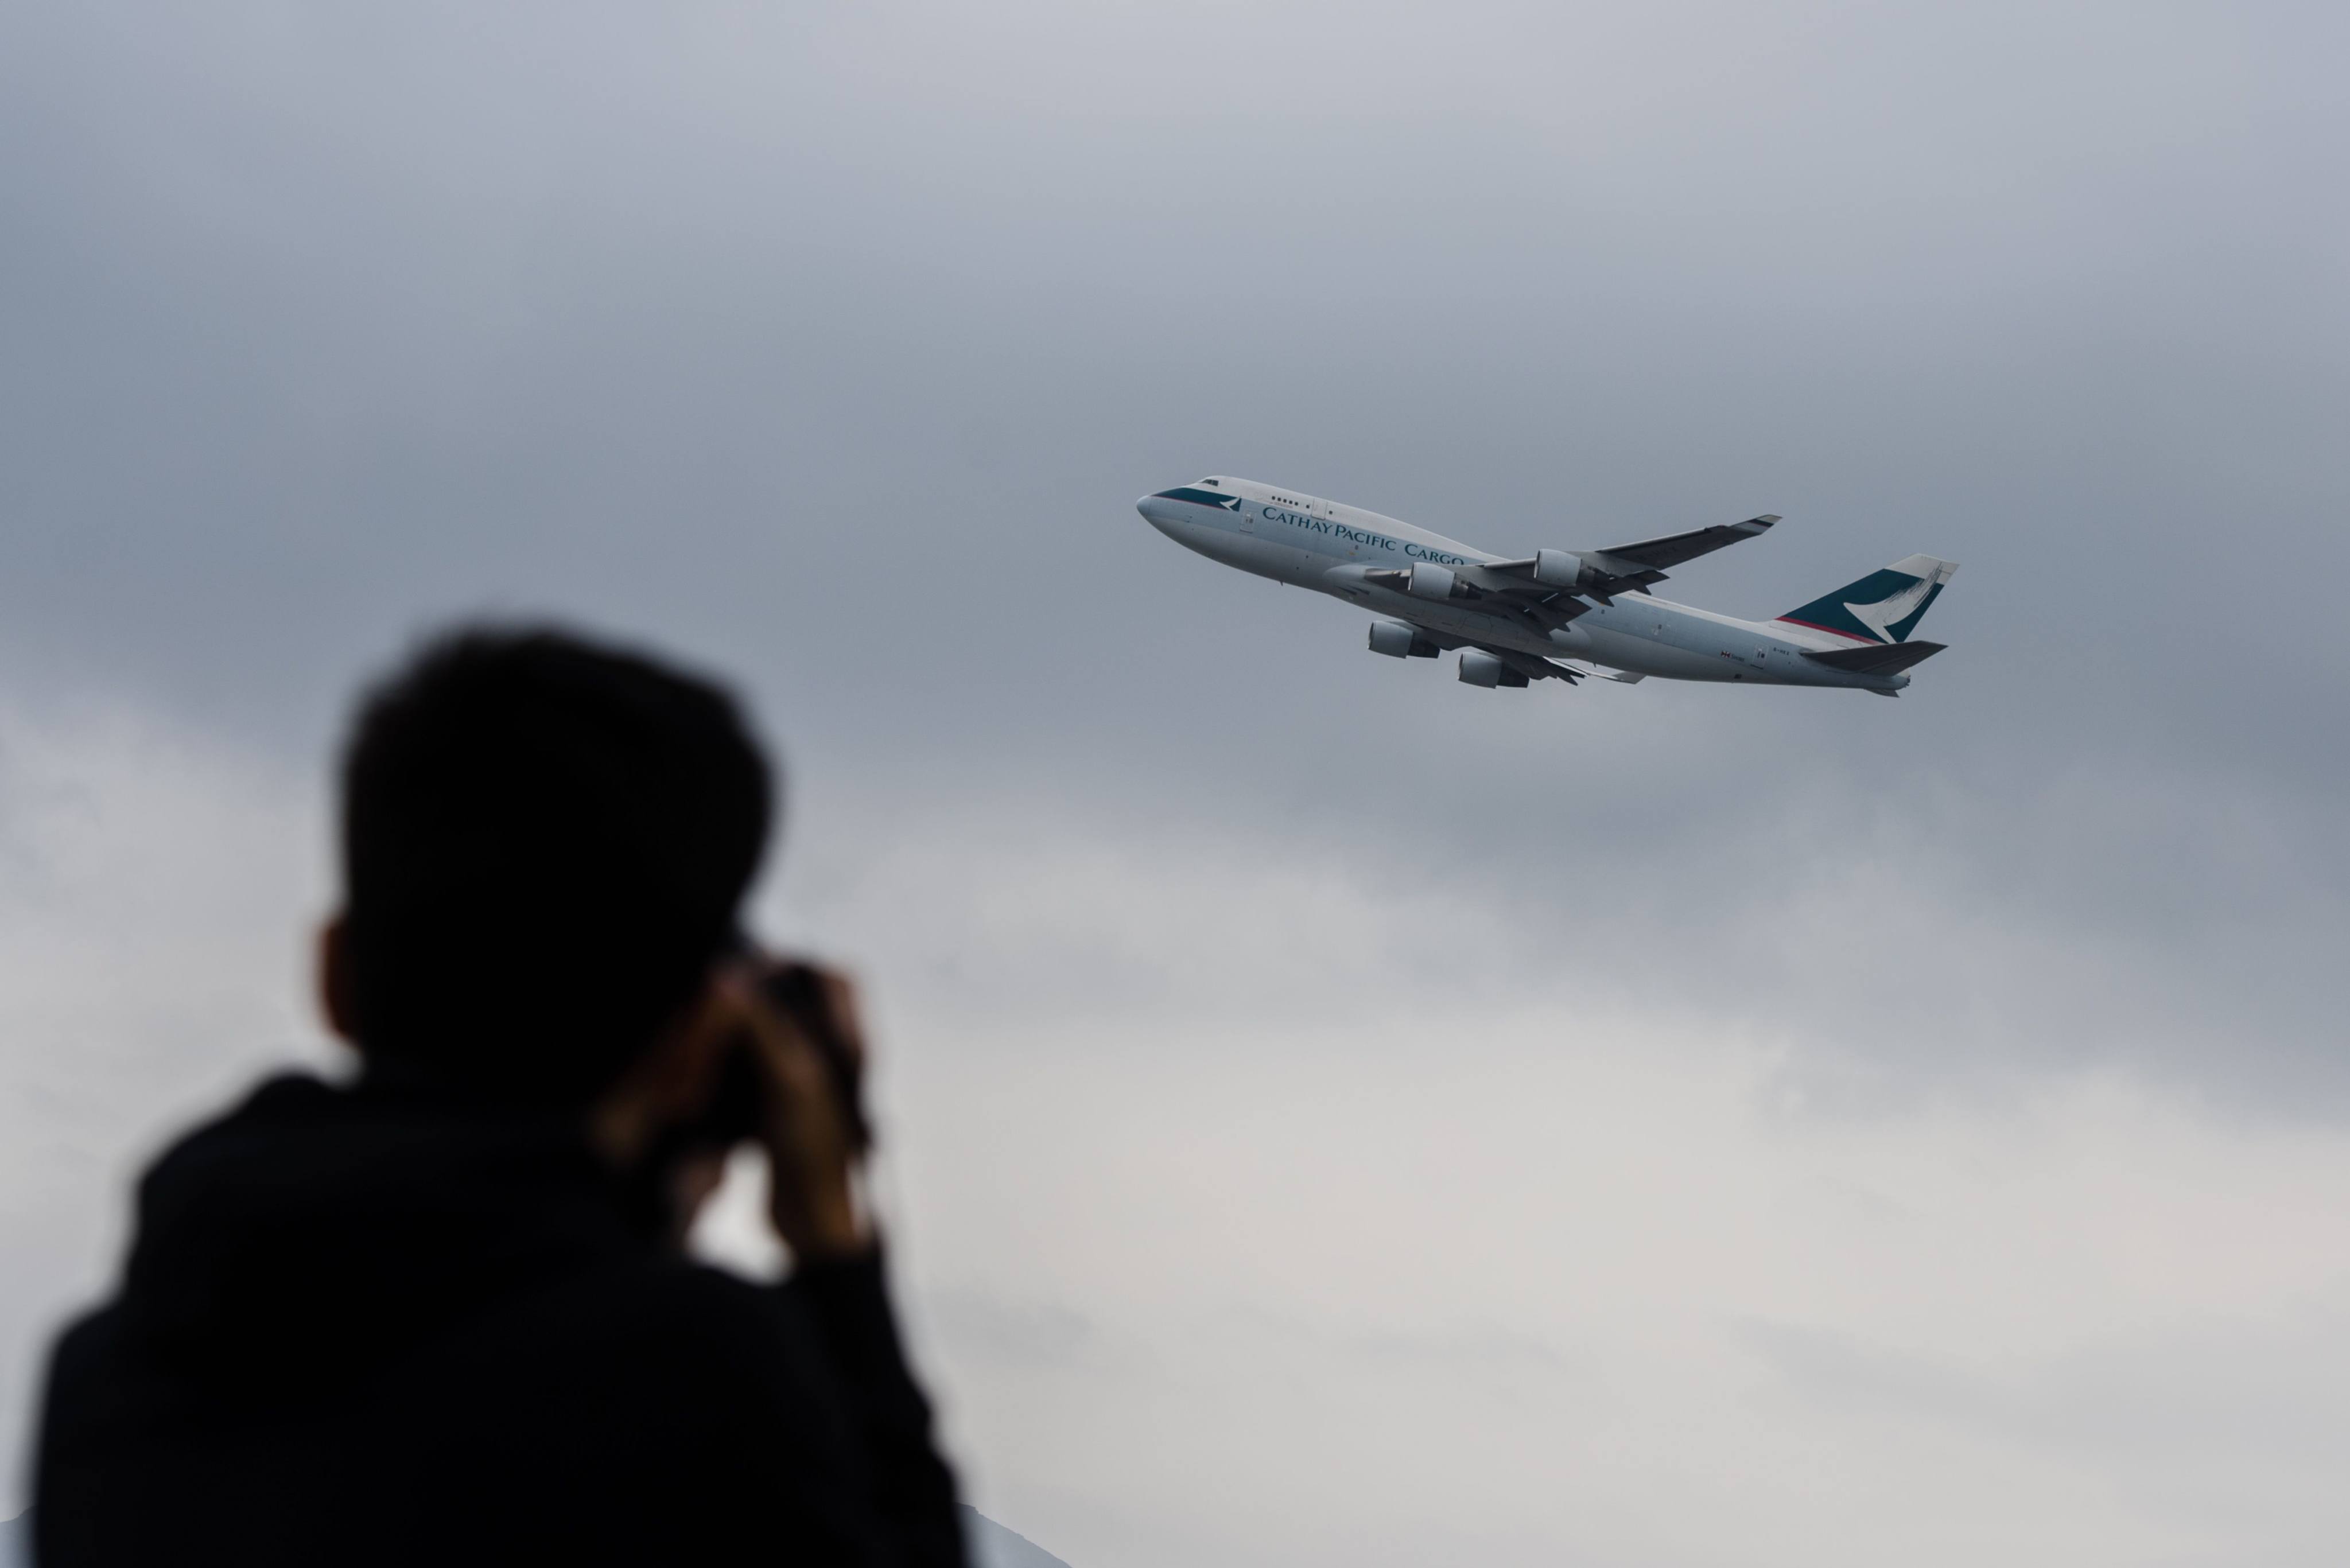 A plane spotter photographs a Cathay Pacific cargo aircraft as it takes off from Hong Kong International Airport. Aircraft enthusiasts from the city and beyond talk about the best ways to watch airliners in action. Photo: AFP